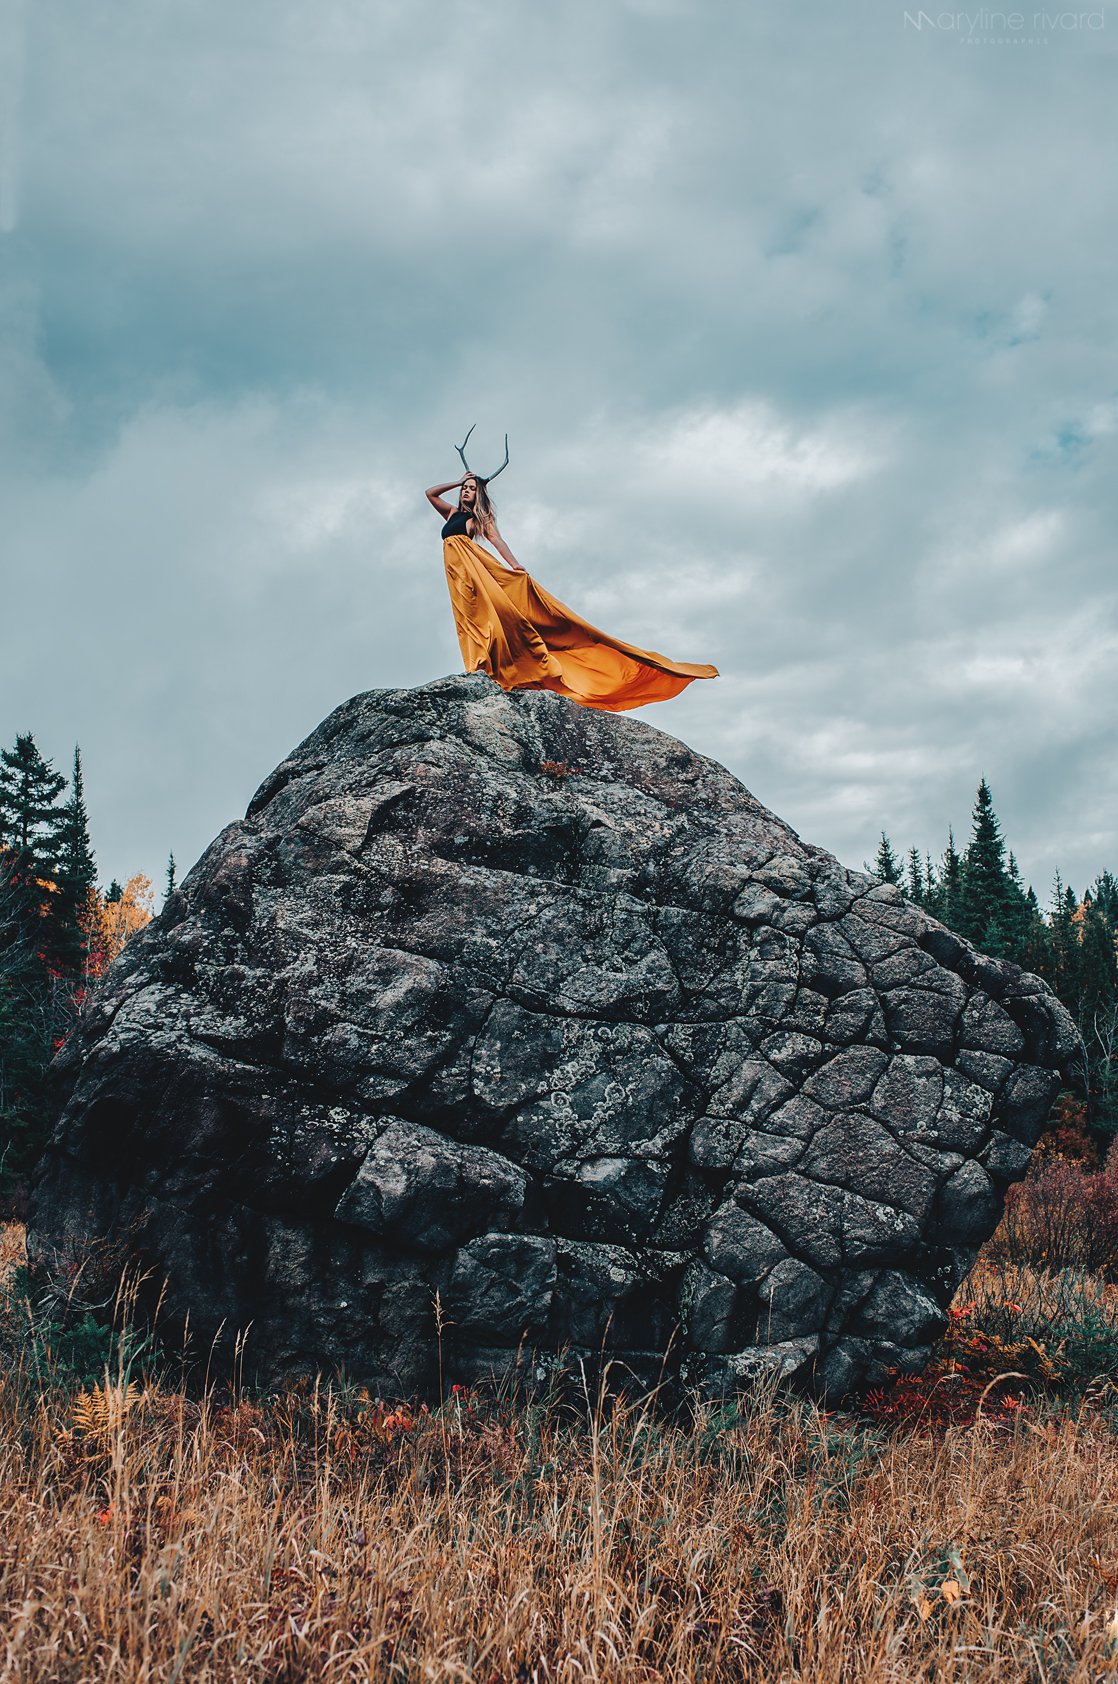 Maryline Rivard's Conceptual Photos Convey Magical Levels of Inspiration